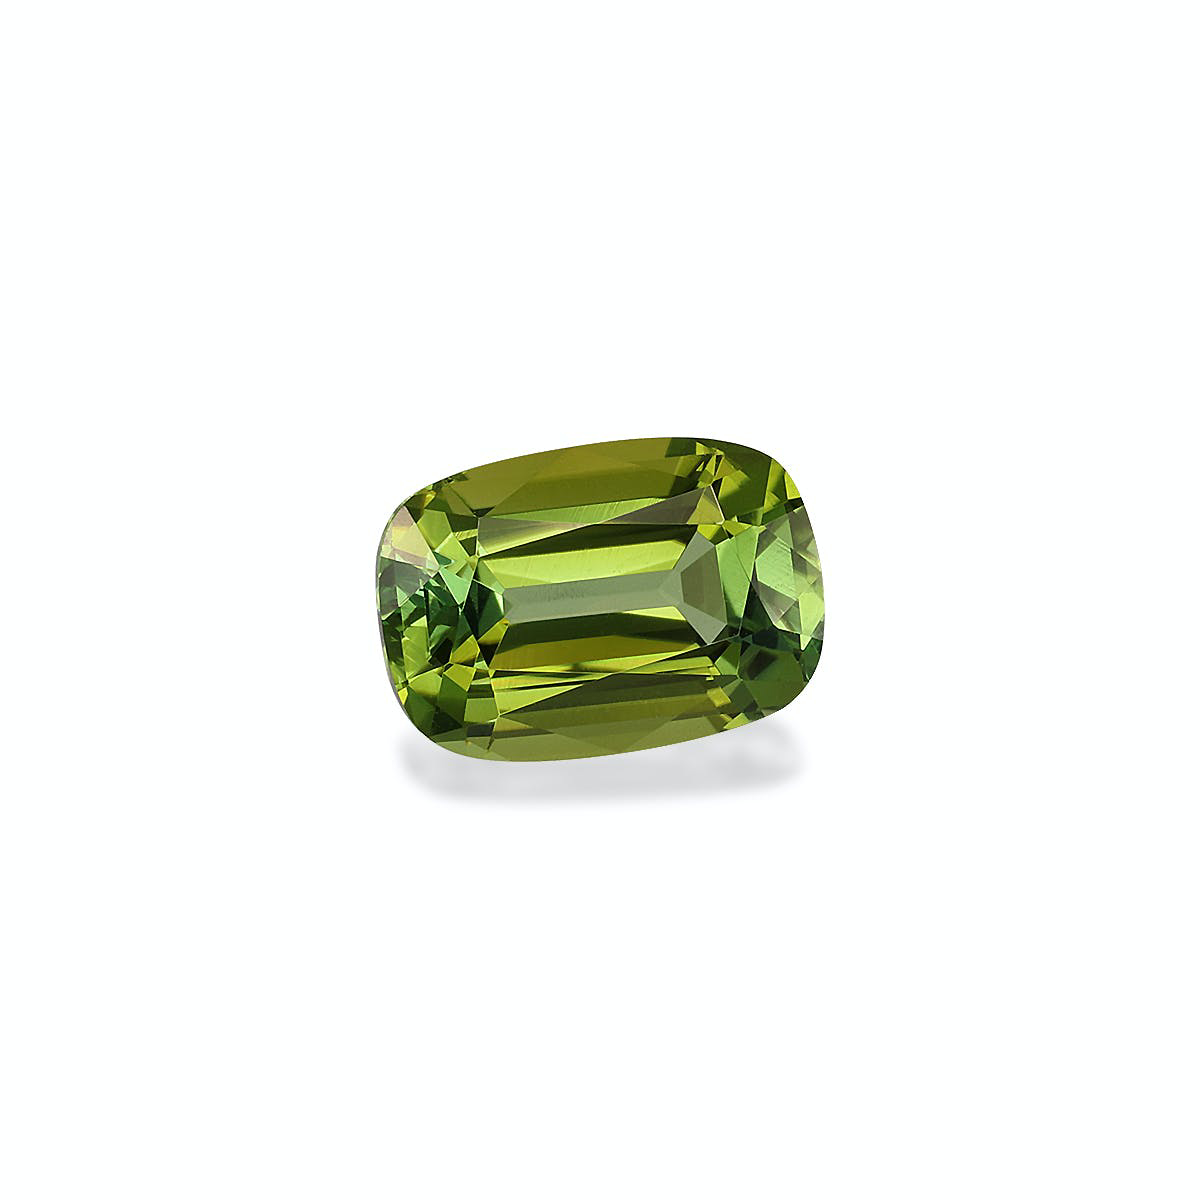 Picture of Lime Green Tourmaline 2.25ct (TG1661)